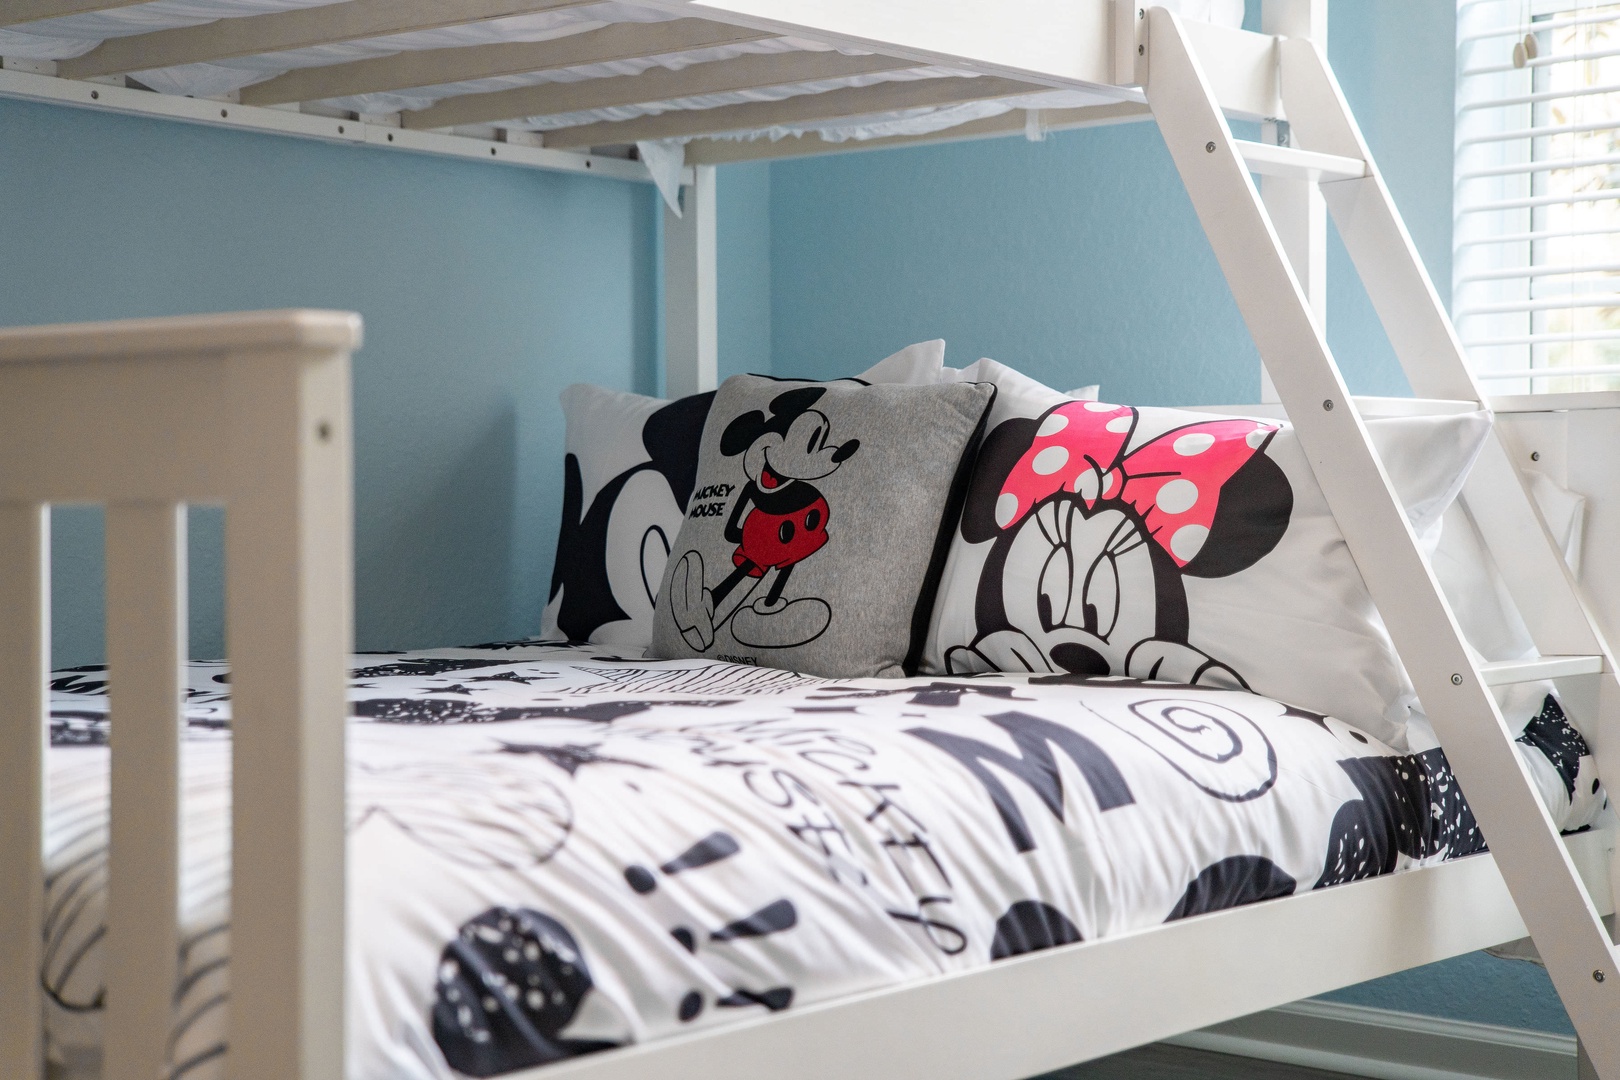 Oh boy! Mickey themed bedroom 1 with twin/full bunk bed, magnet board, and Smart TV